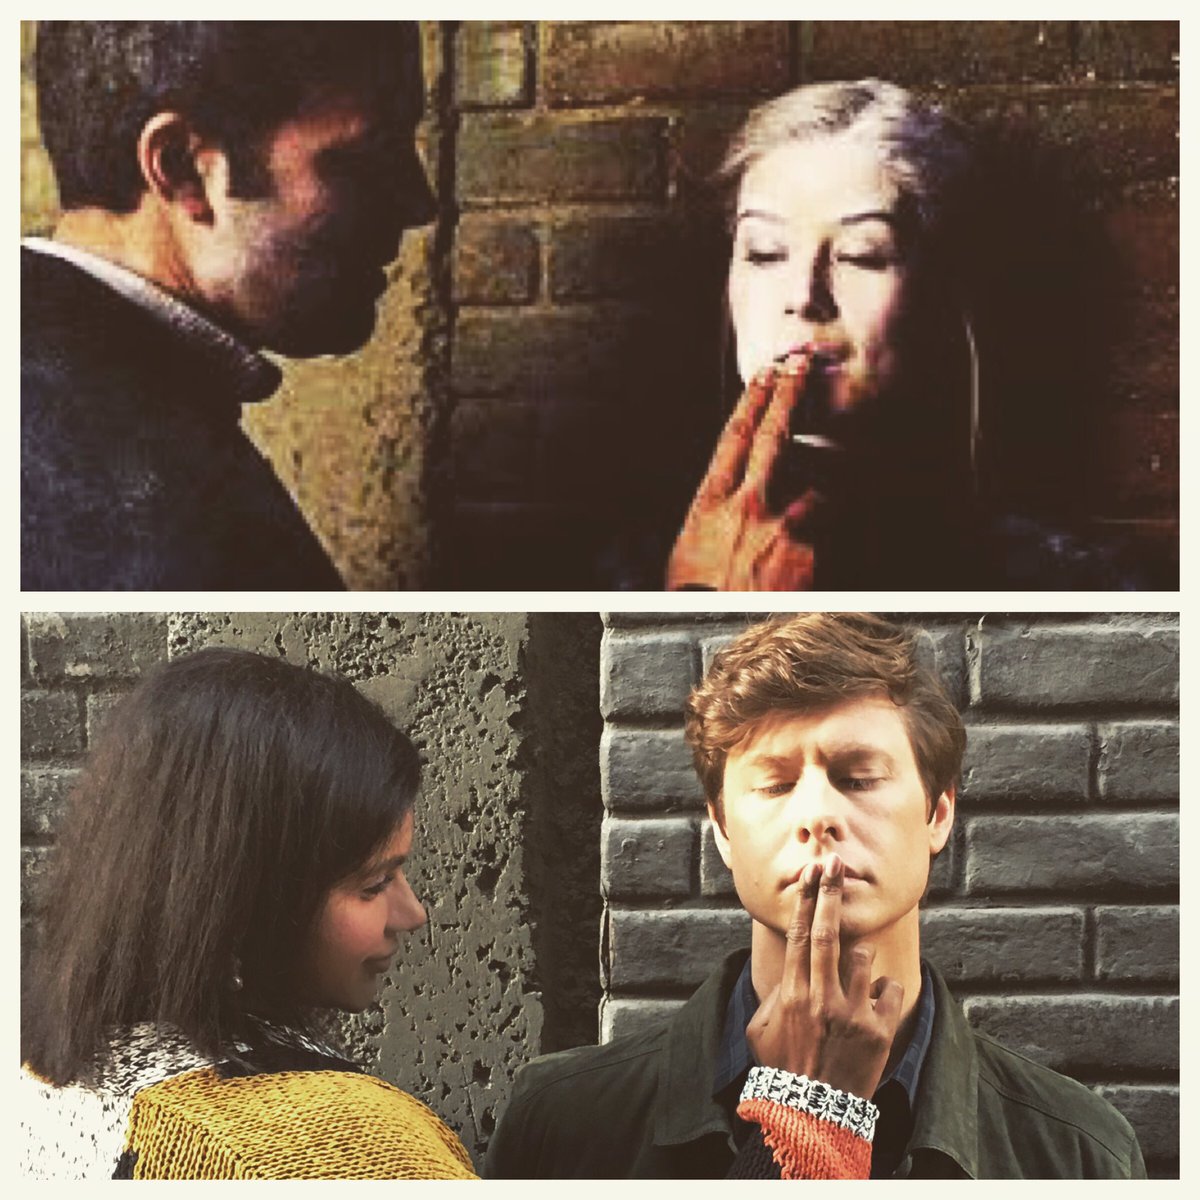 Recreating iconic Gone Girl moments with @ders808. Both equally great, I think https://t.co/yd8nqMRmz6